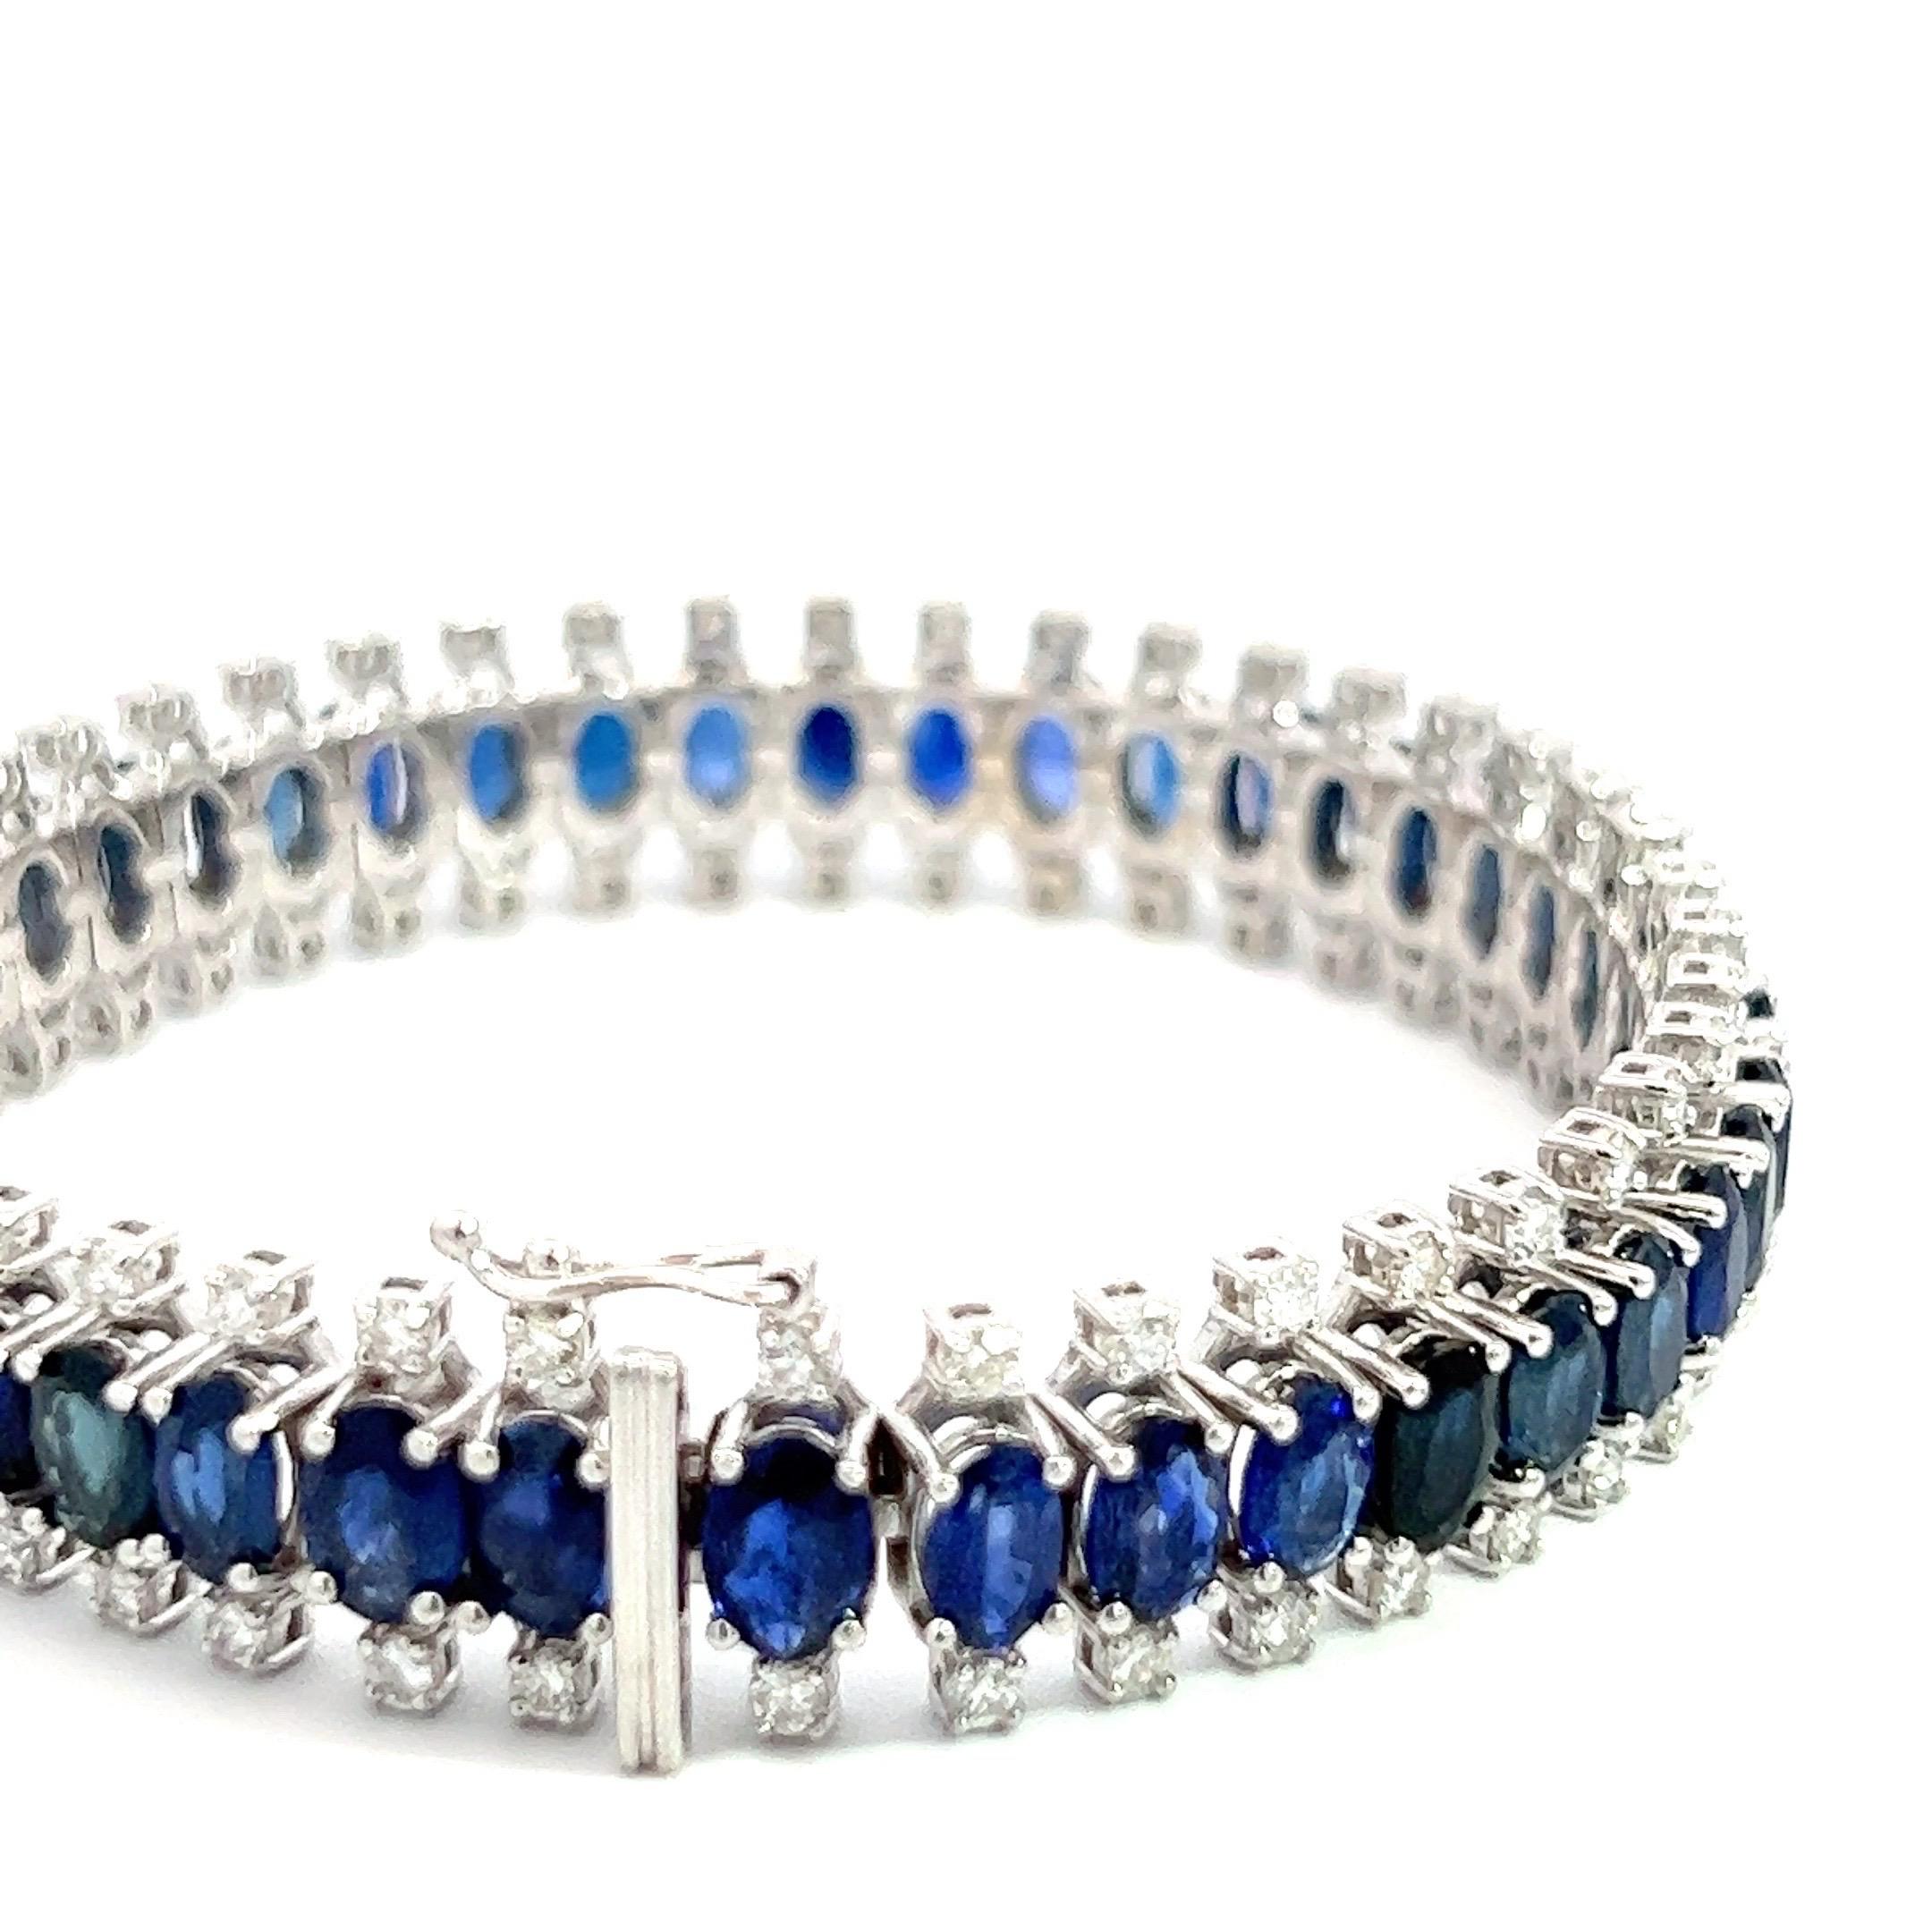 Introducing a truly captivating masterpiece, this exquisite bracelet marries the allure of unique diamonds and the regal beauty of royal blue sapphires in a mesmerizing union. Crafted with meticulous precision, each stunning gemstone is delicately